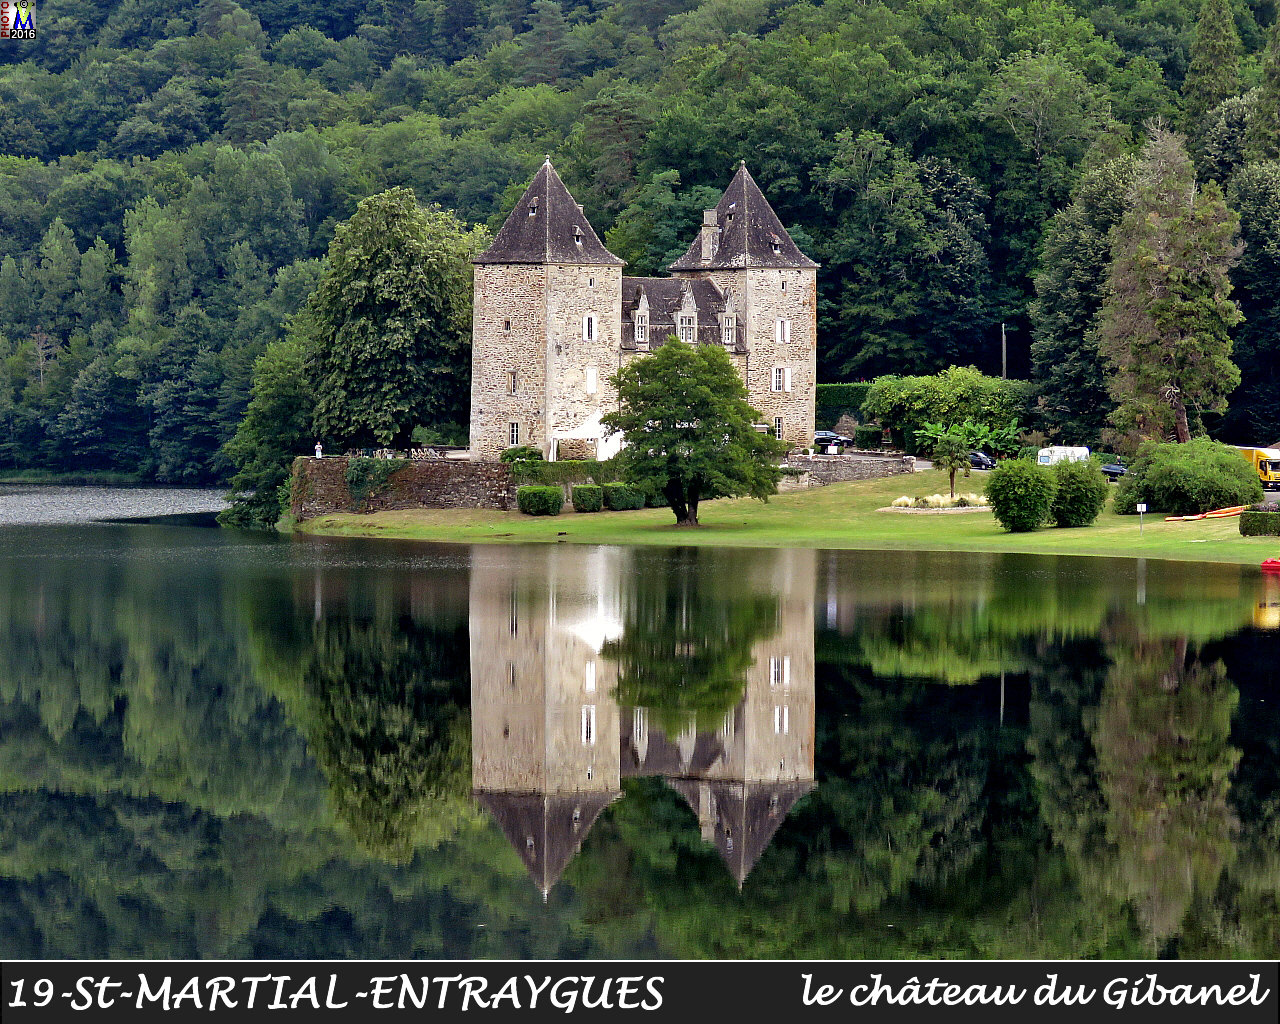 19StMARTIAL-ENTRAYGUES_chateau_102.jpg